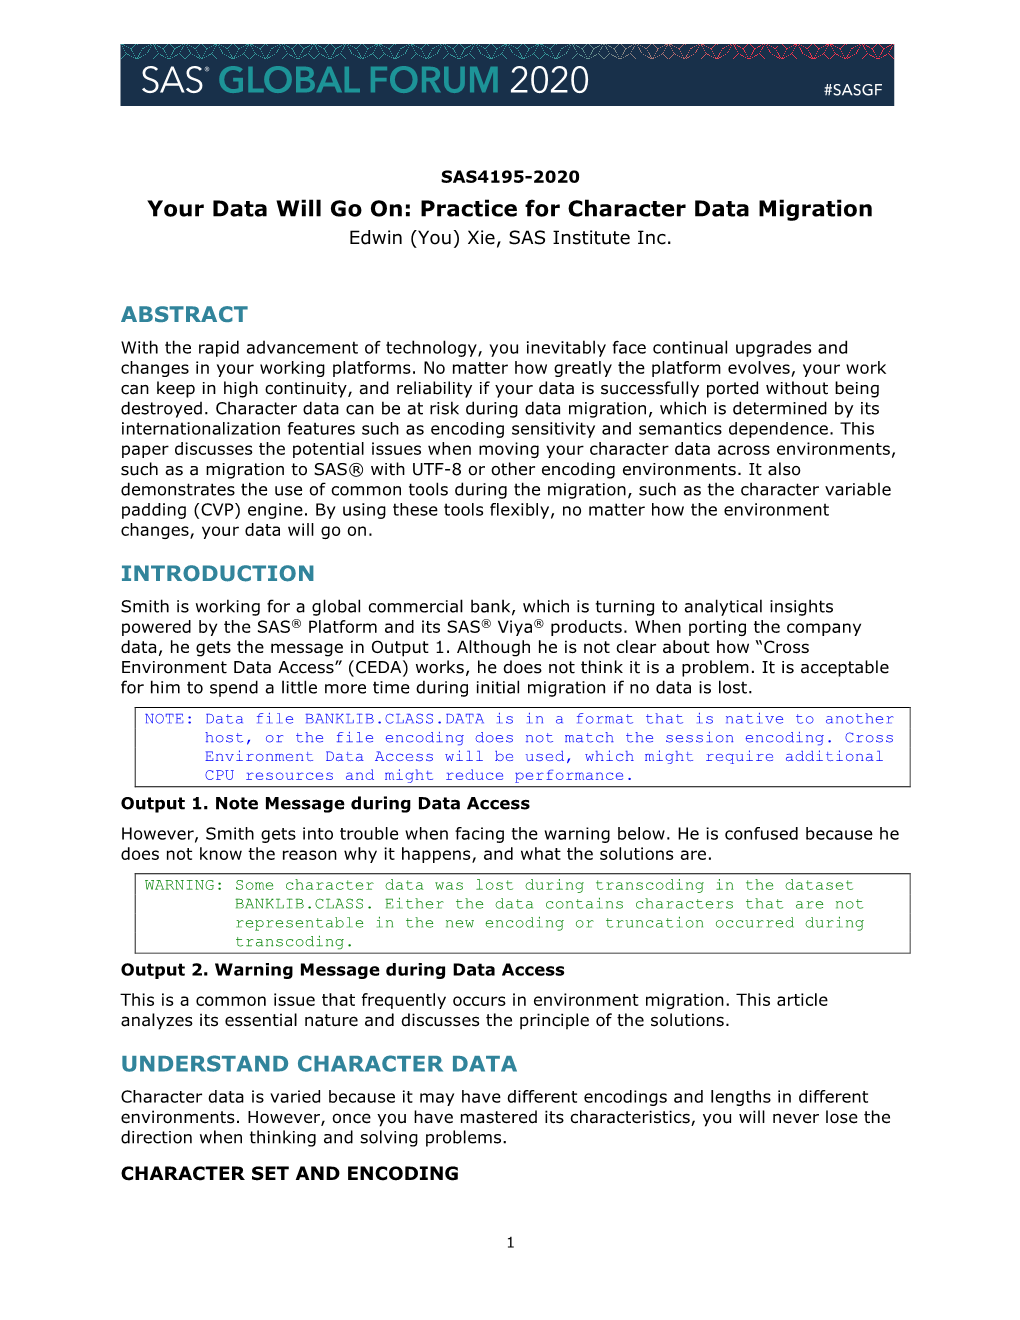 Your Data Will Go On: Practice for Character Data Migration Edwin (You) Xie, SAS Institute Inc